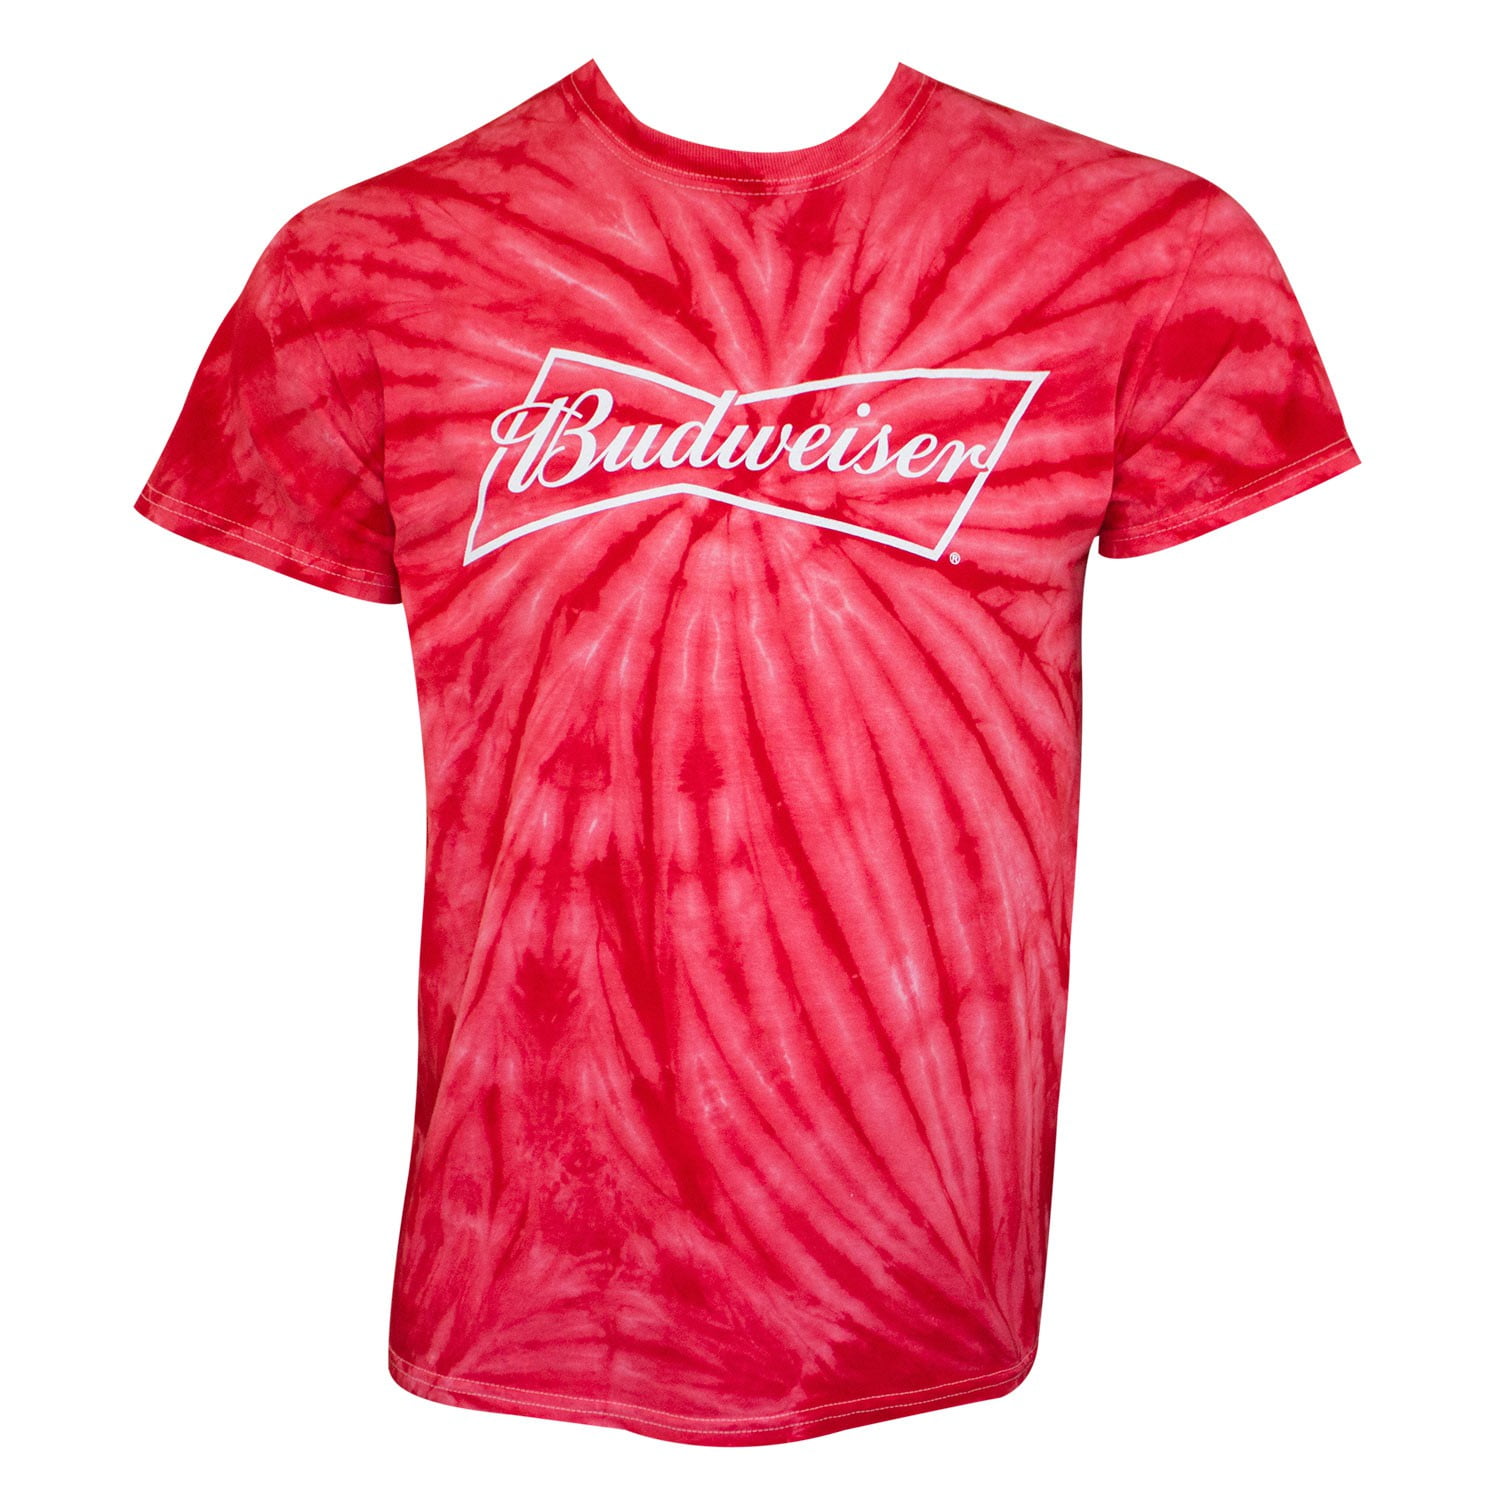 Large Budweiser Beer Bud Bowtie Tee T Shirt ~ Fruit Of The Loom New & F/S 